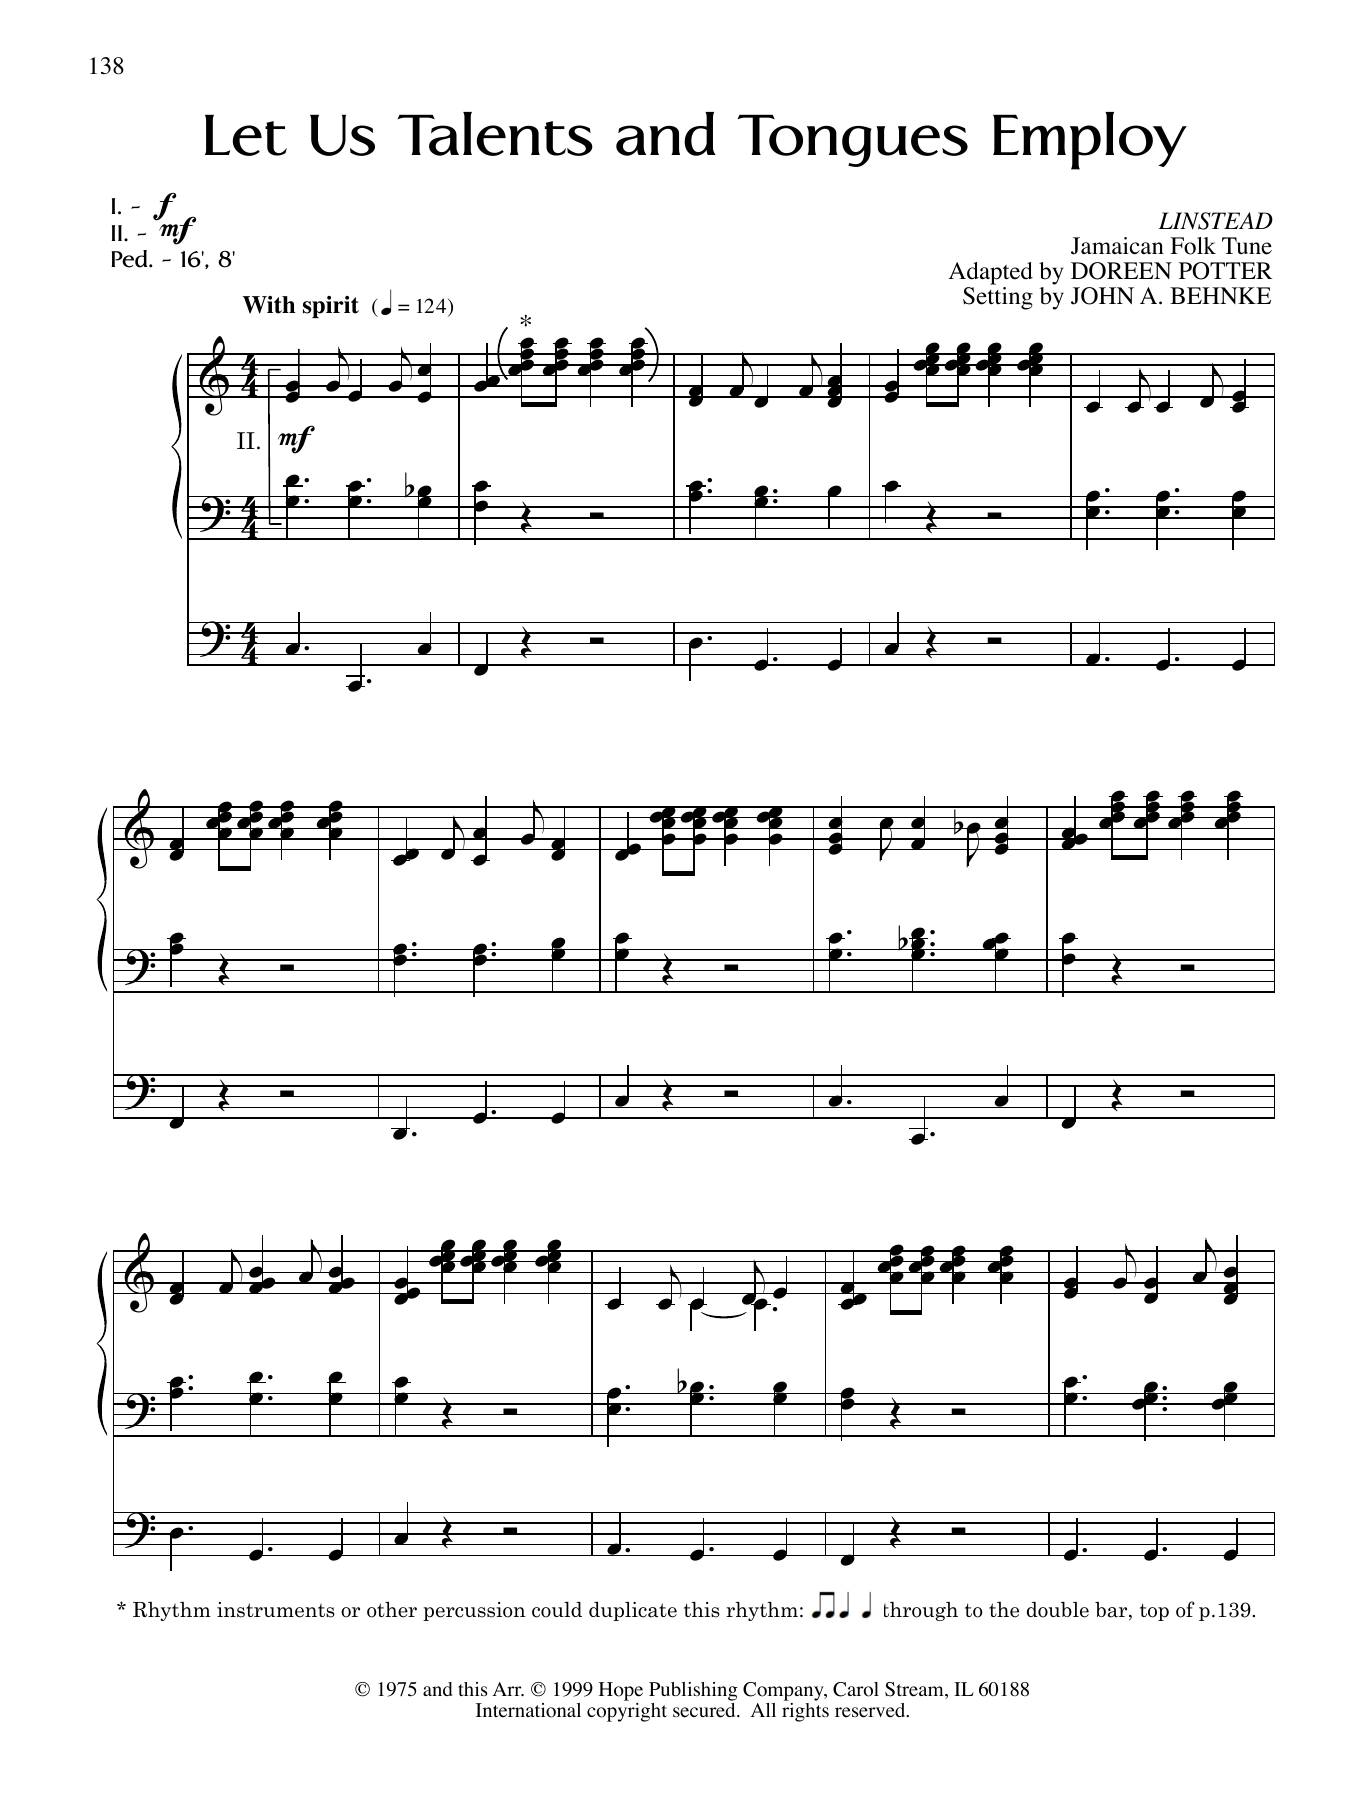 Download John A. Behnke Let Us Talents and Tongues Employ Sheet Music